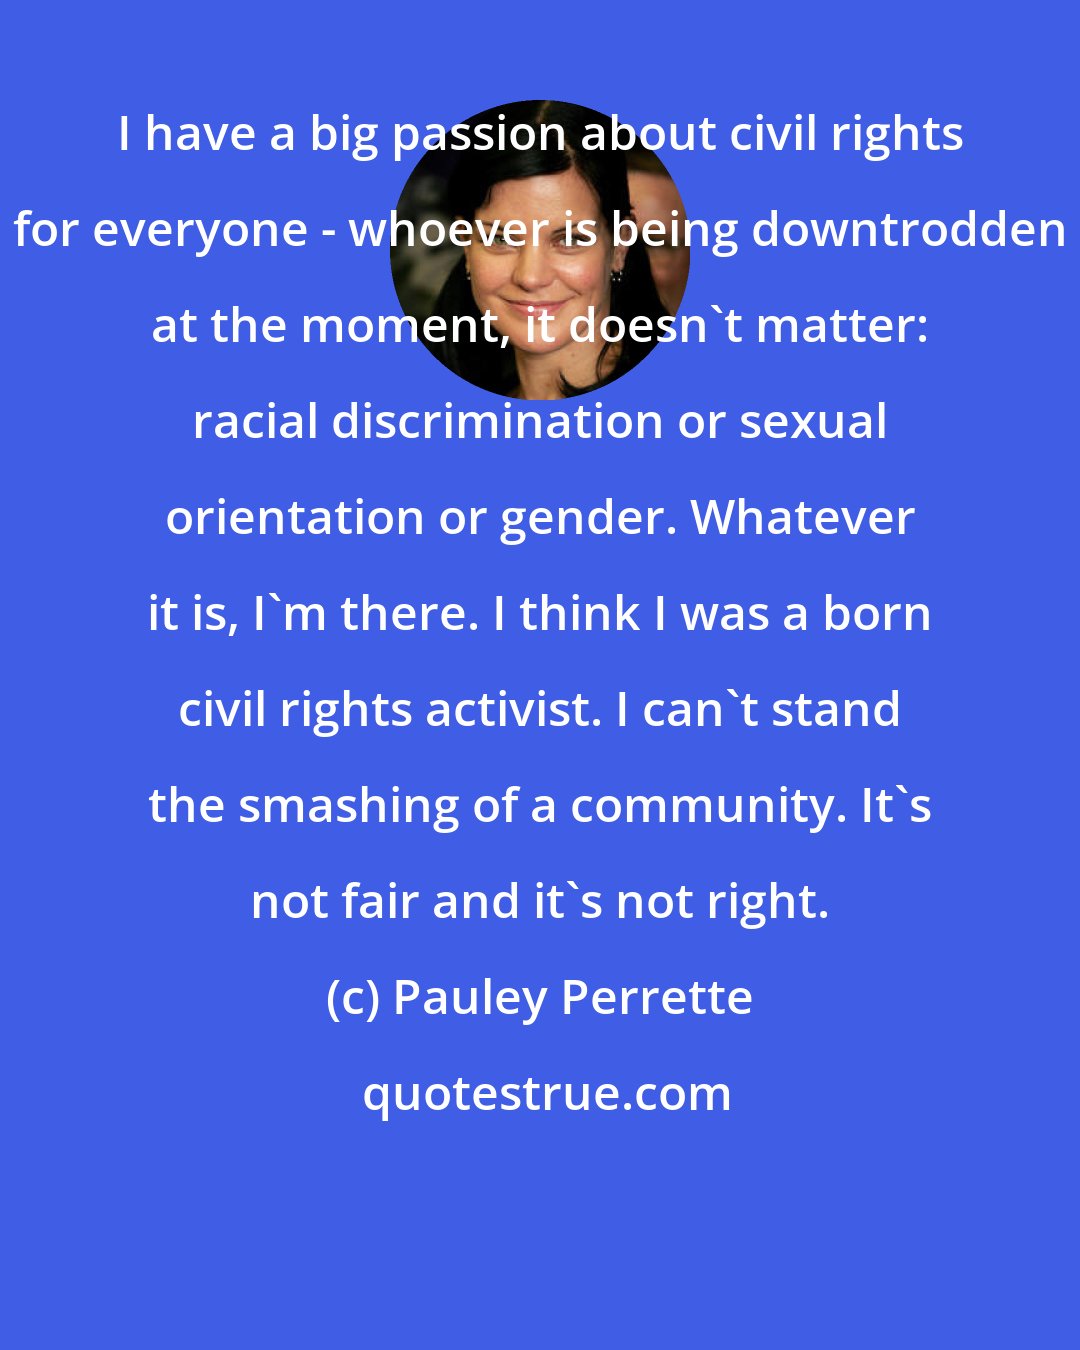 Pauley Perrette: I have a big passion about civil rights for everyone - whoever is being downtrodden at the moment, it doesn't matter: racial discrimination or sexual orientation or gender. Whatever it is, I'm there. I think I was a born civil rights activist. I can't stand the smashing of a community. It's not fair and it's not right.